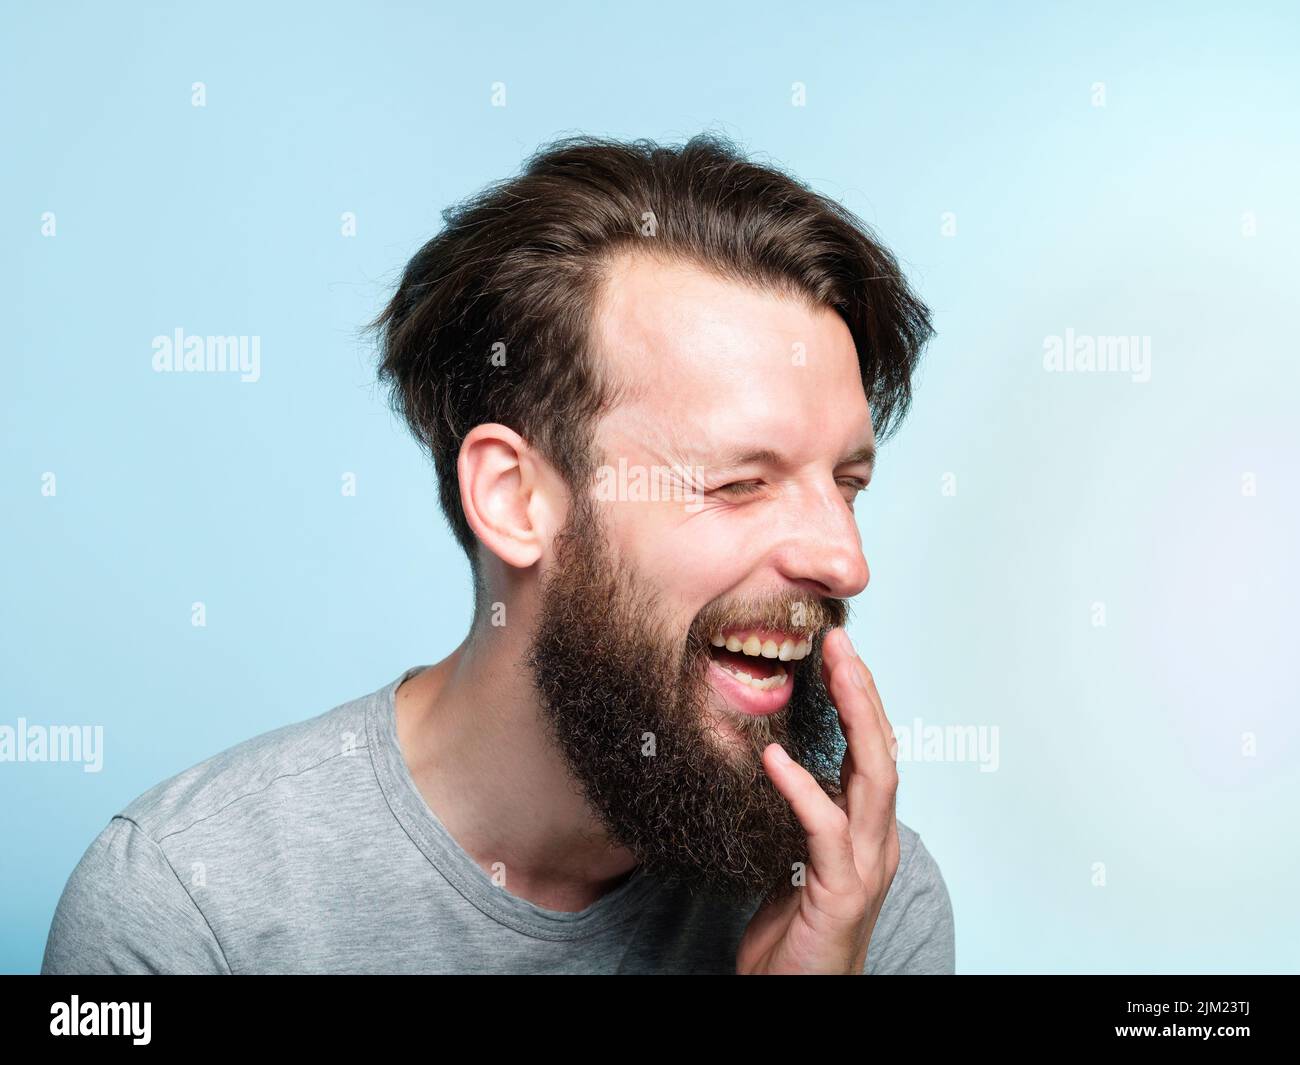 happiness enjoyment laugh man wide grin emotion Stock Photo